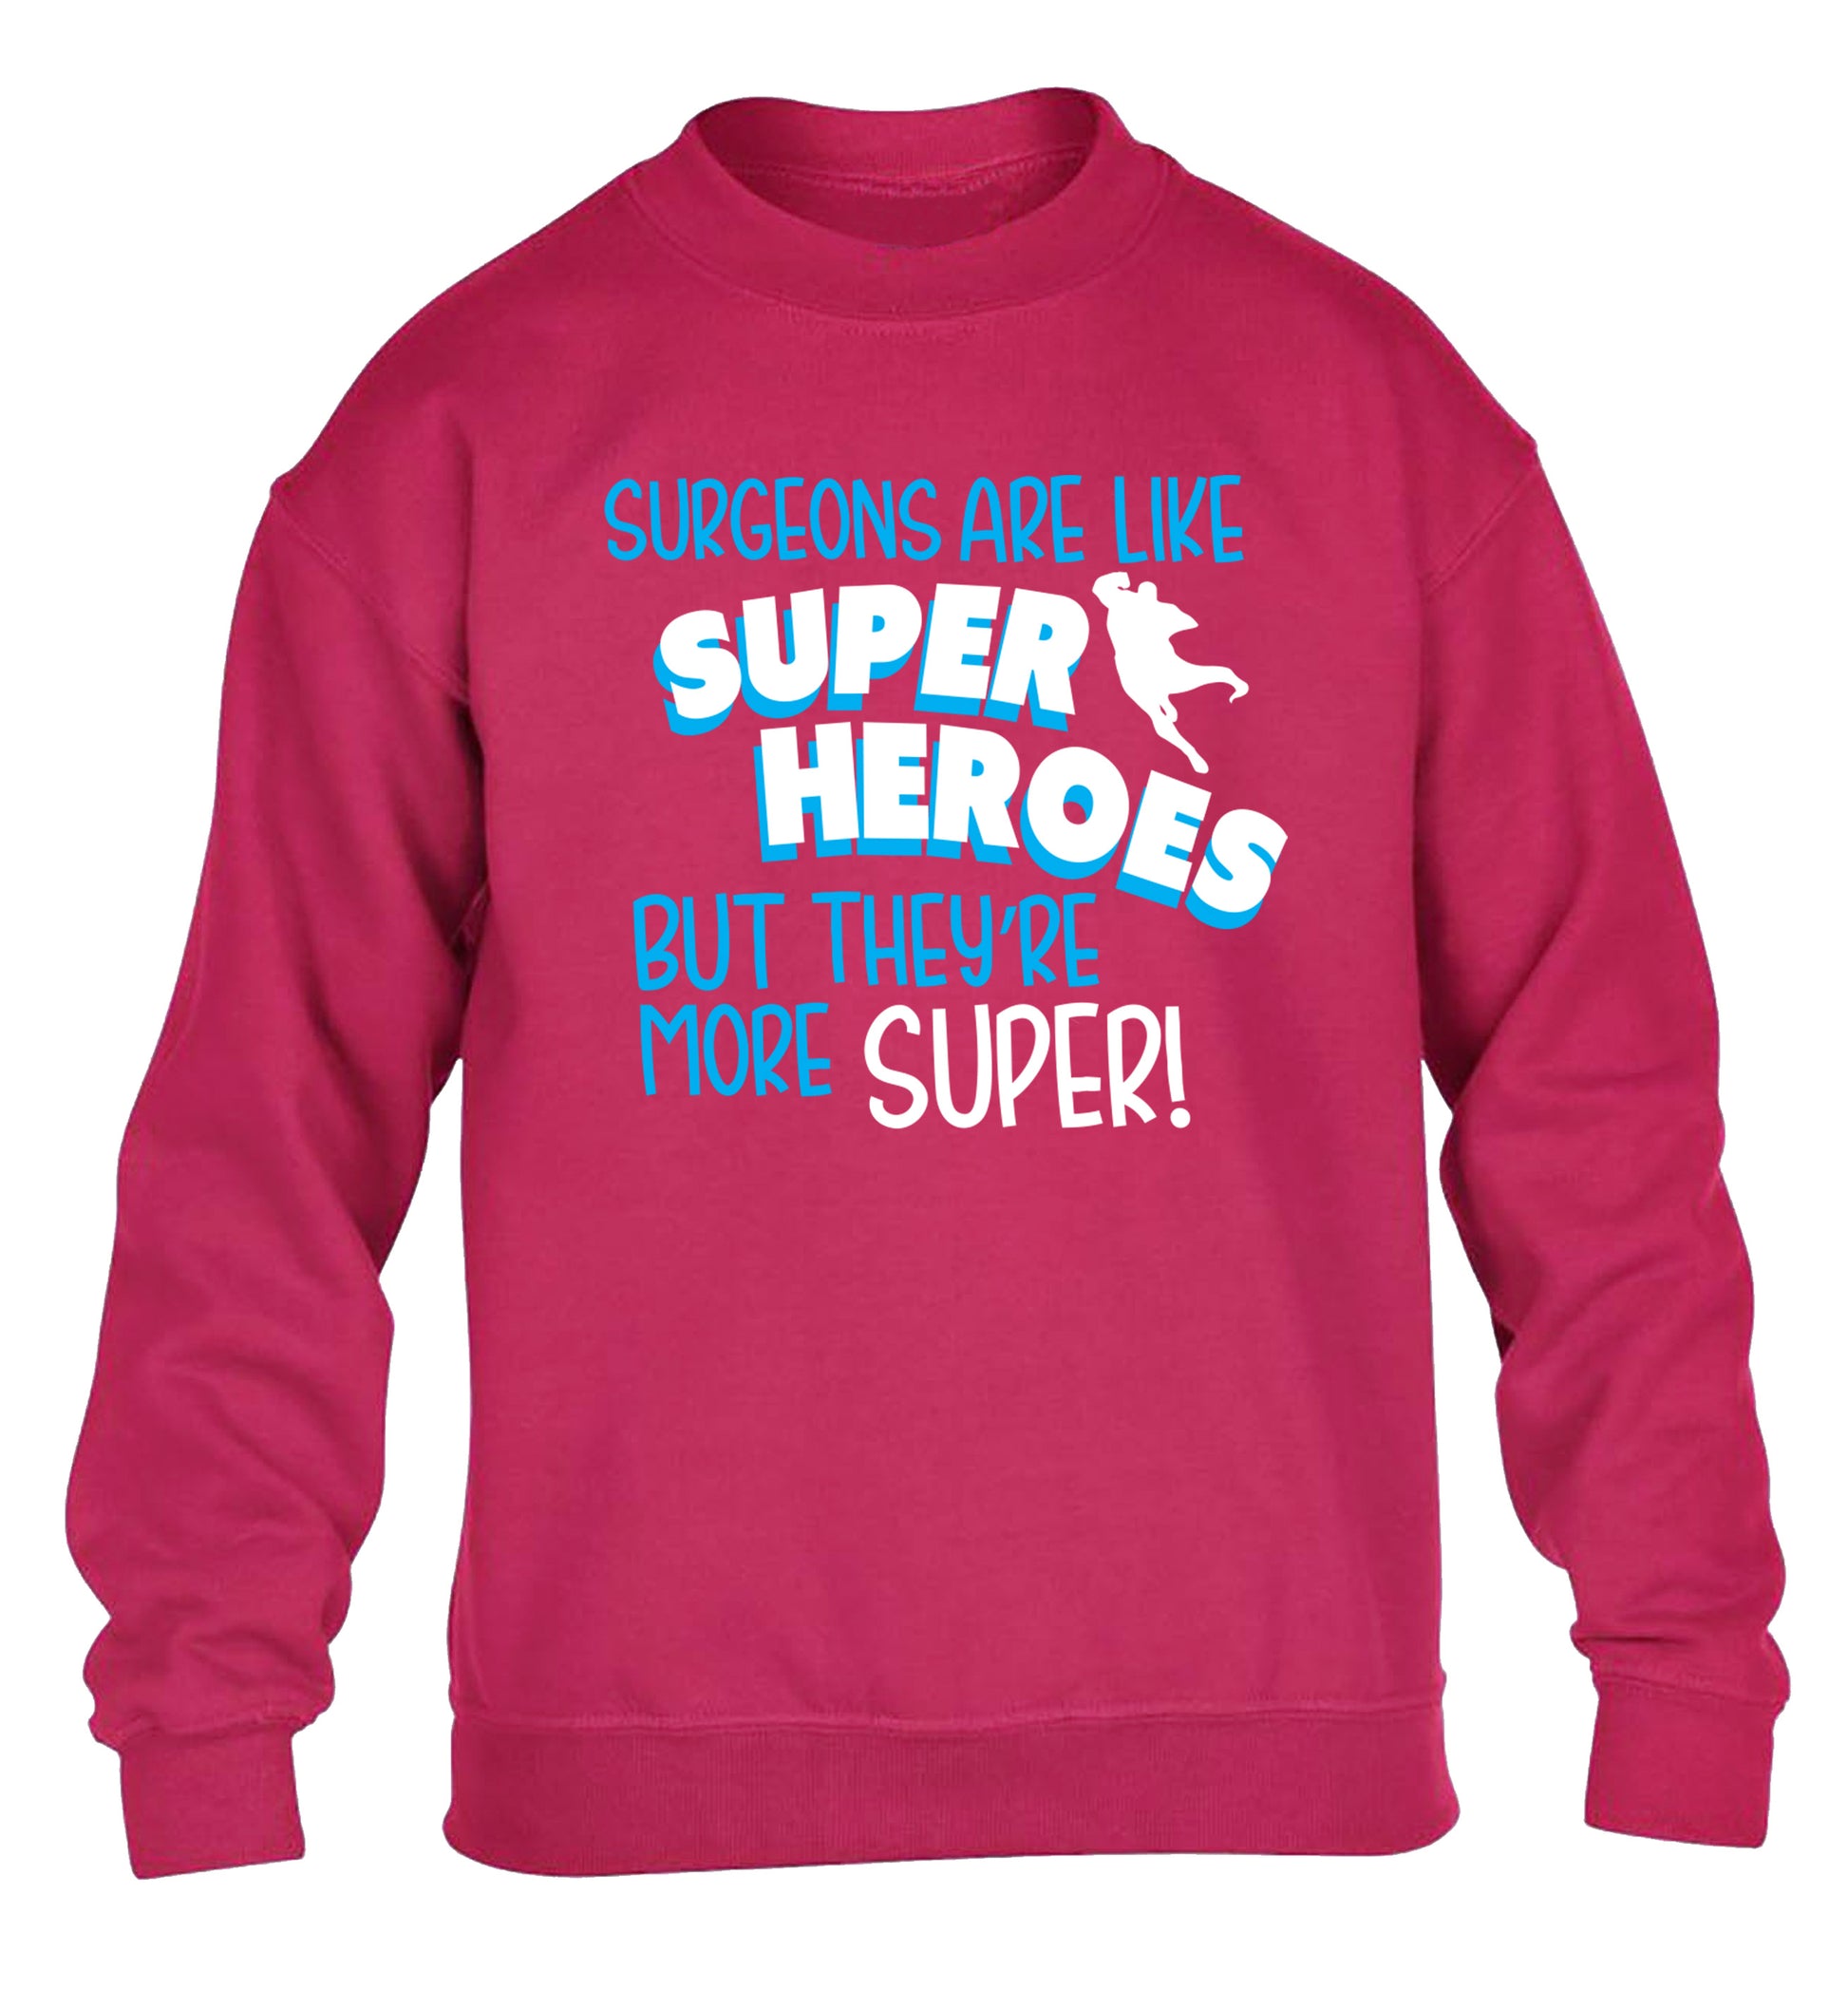 Surgeons are like superheros but they're more super children's pink sweater 12-13 Years